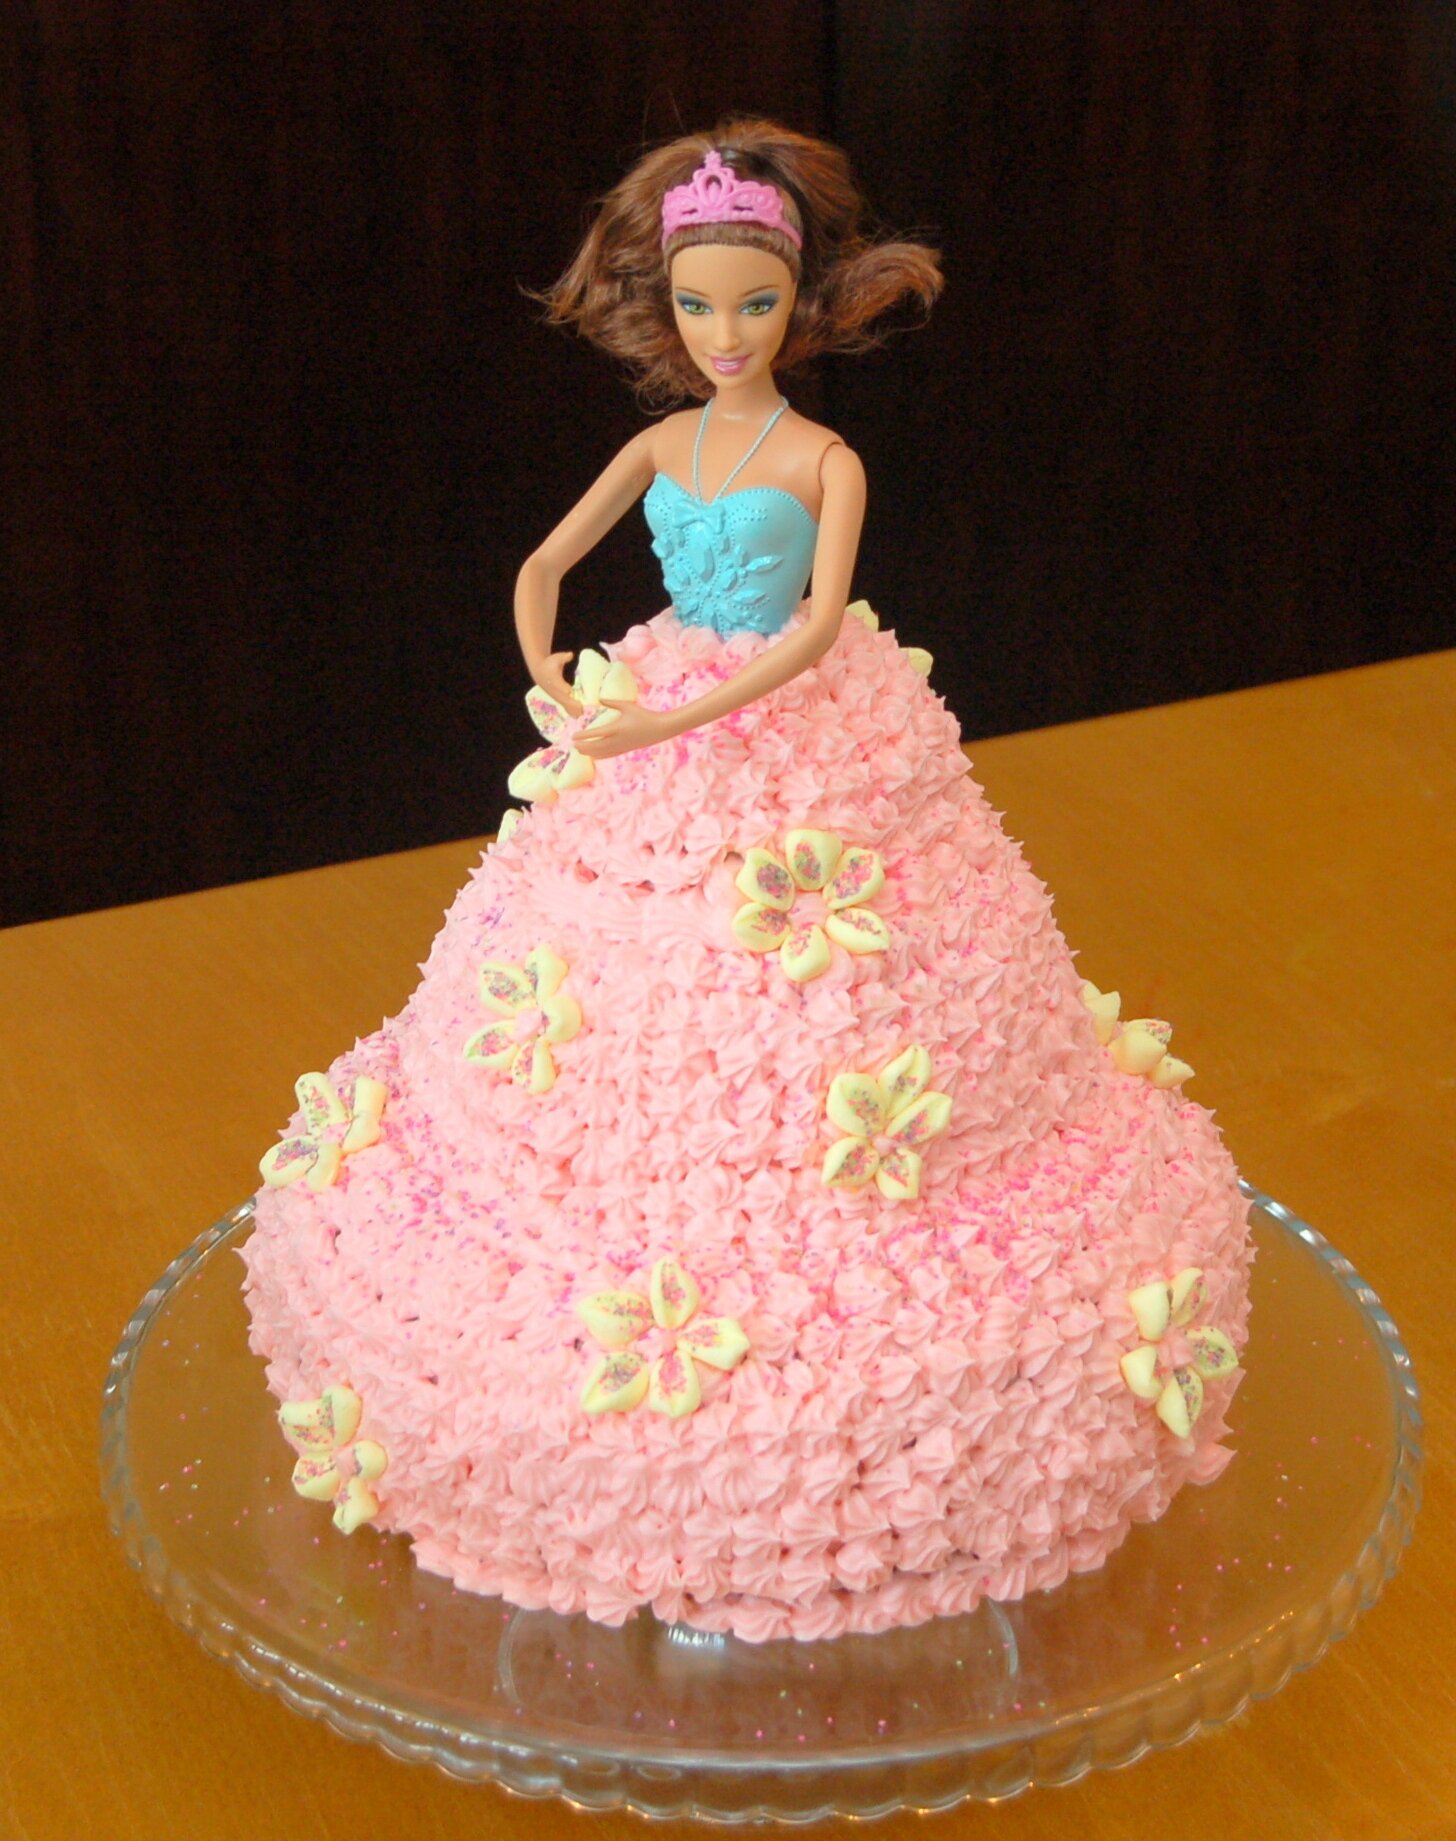 How to make a Barbie Cake – It's easier than you think!